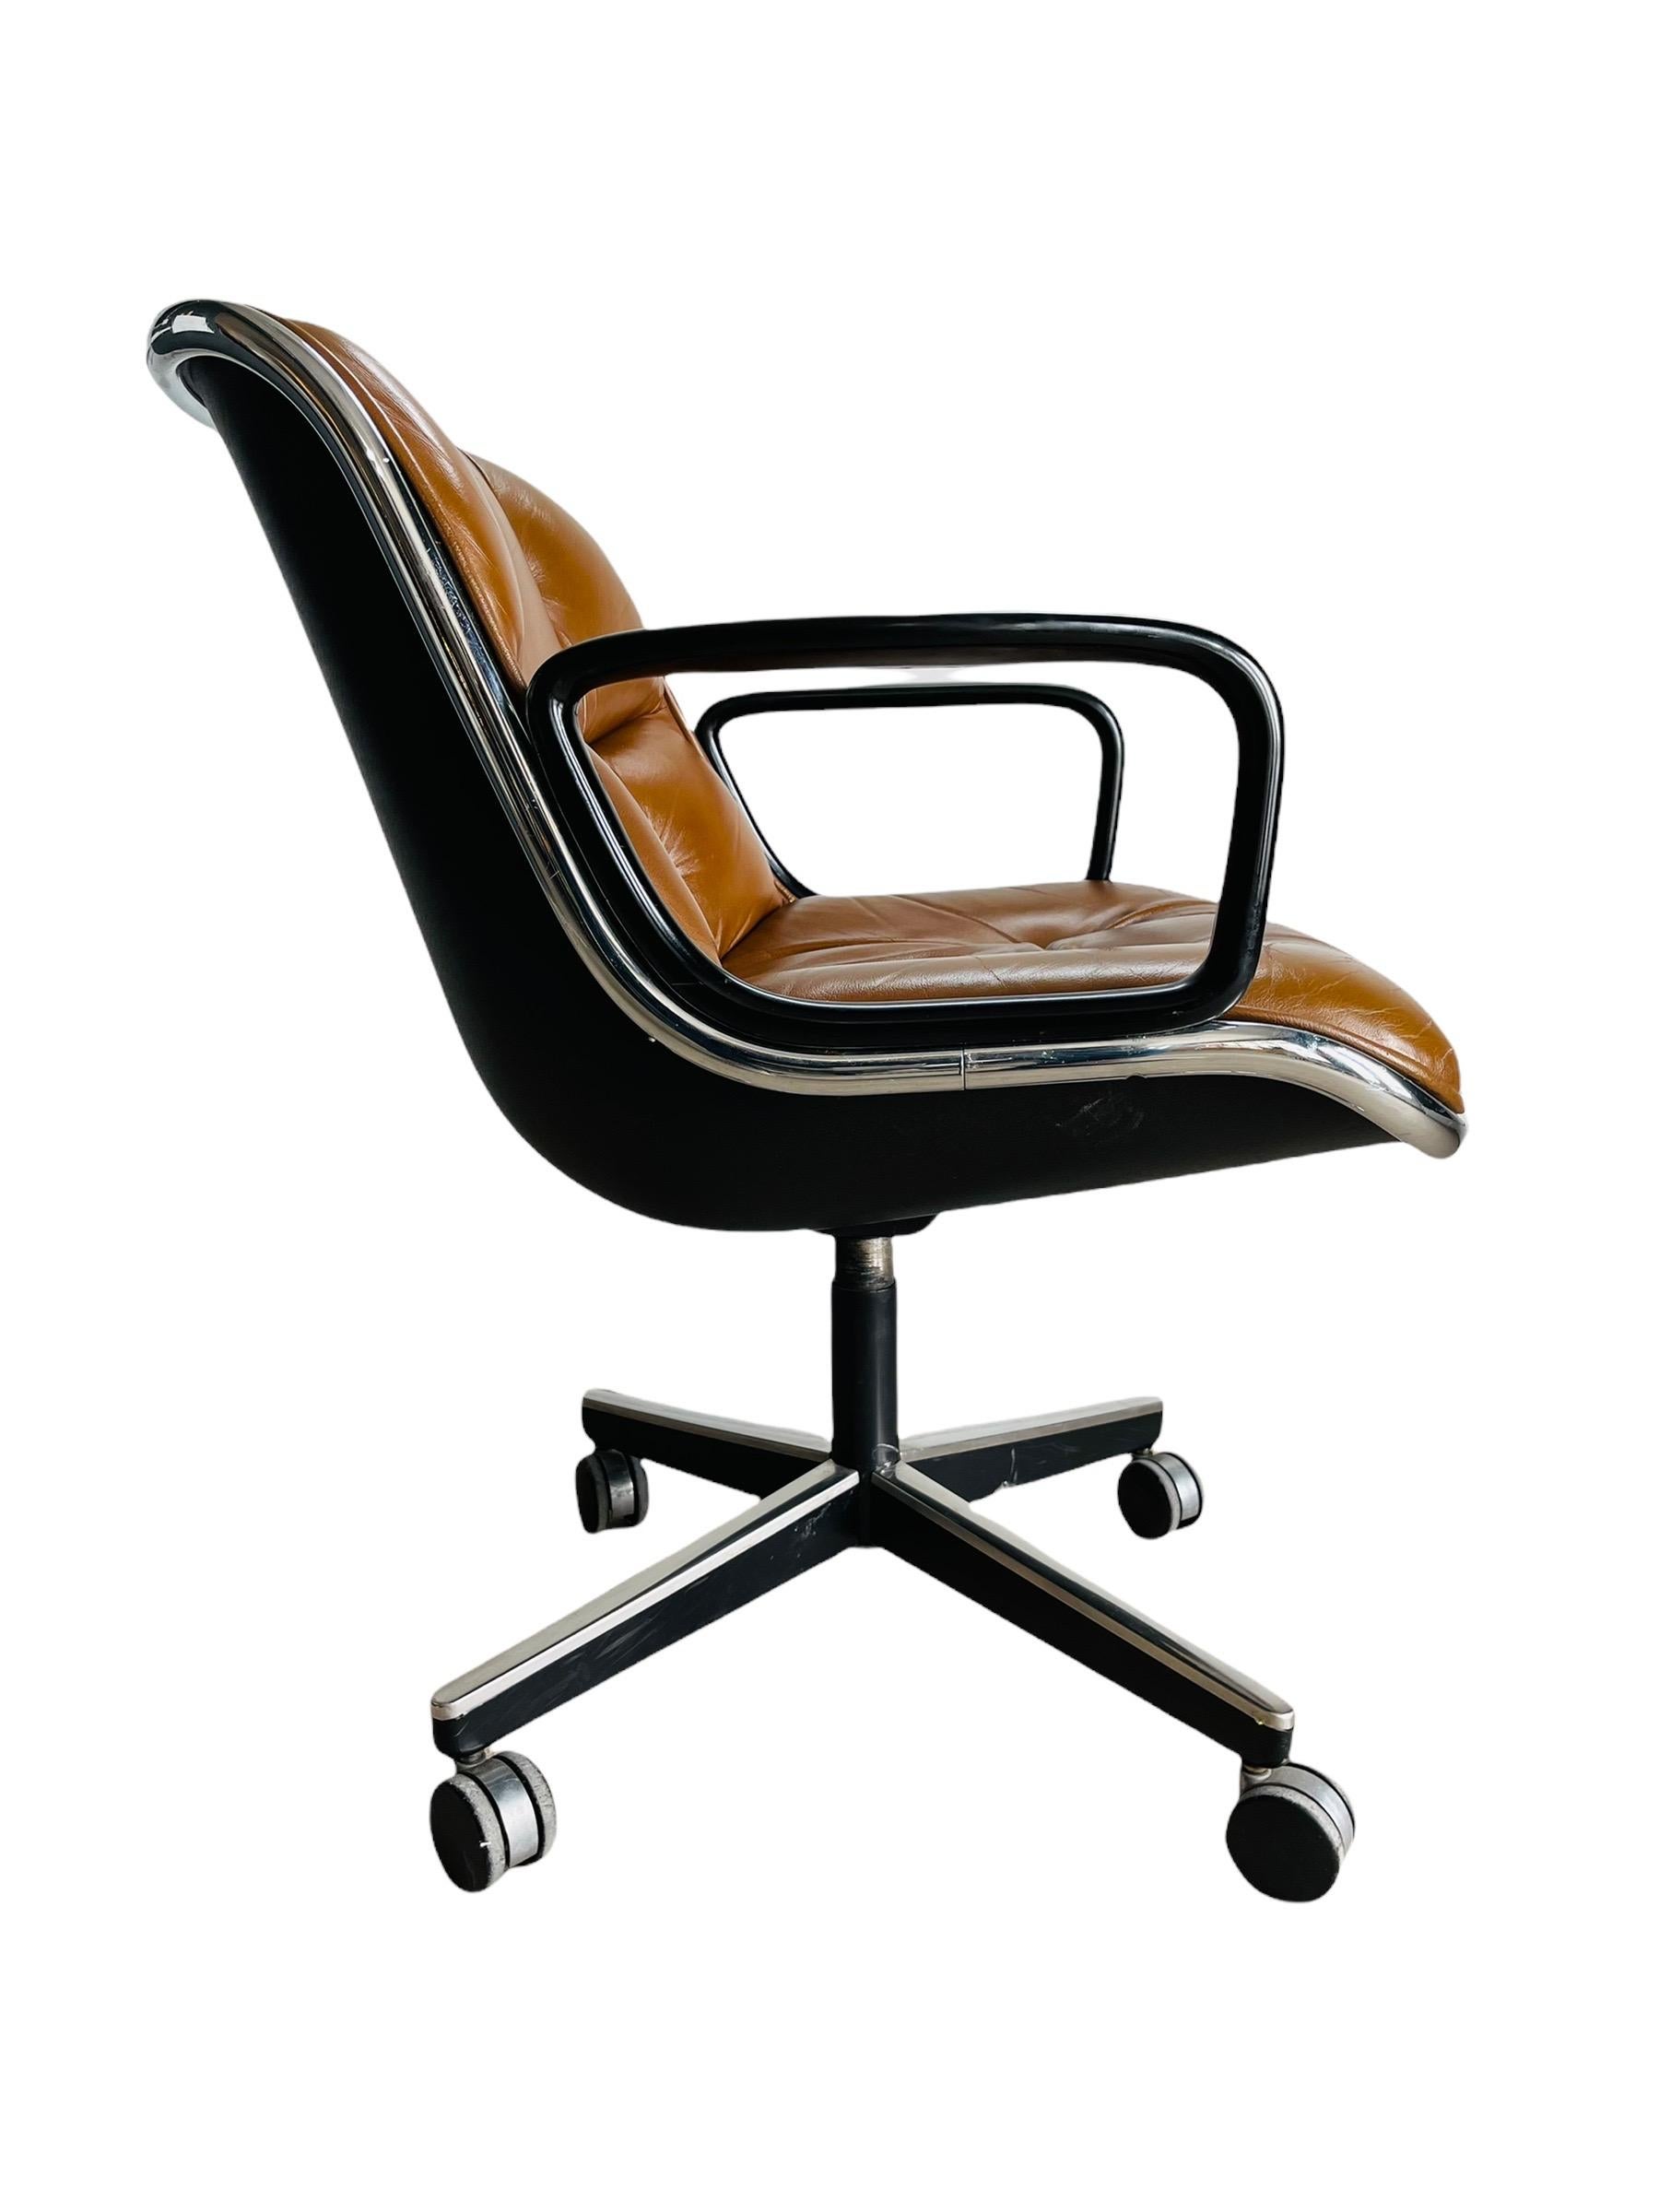 American Pollock Executive Office Armchair Designed by Charles Pollock for Knoll